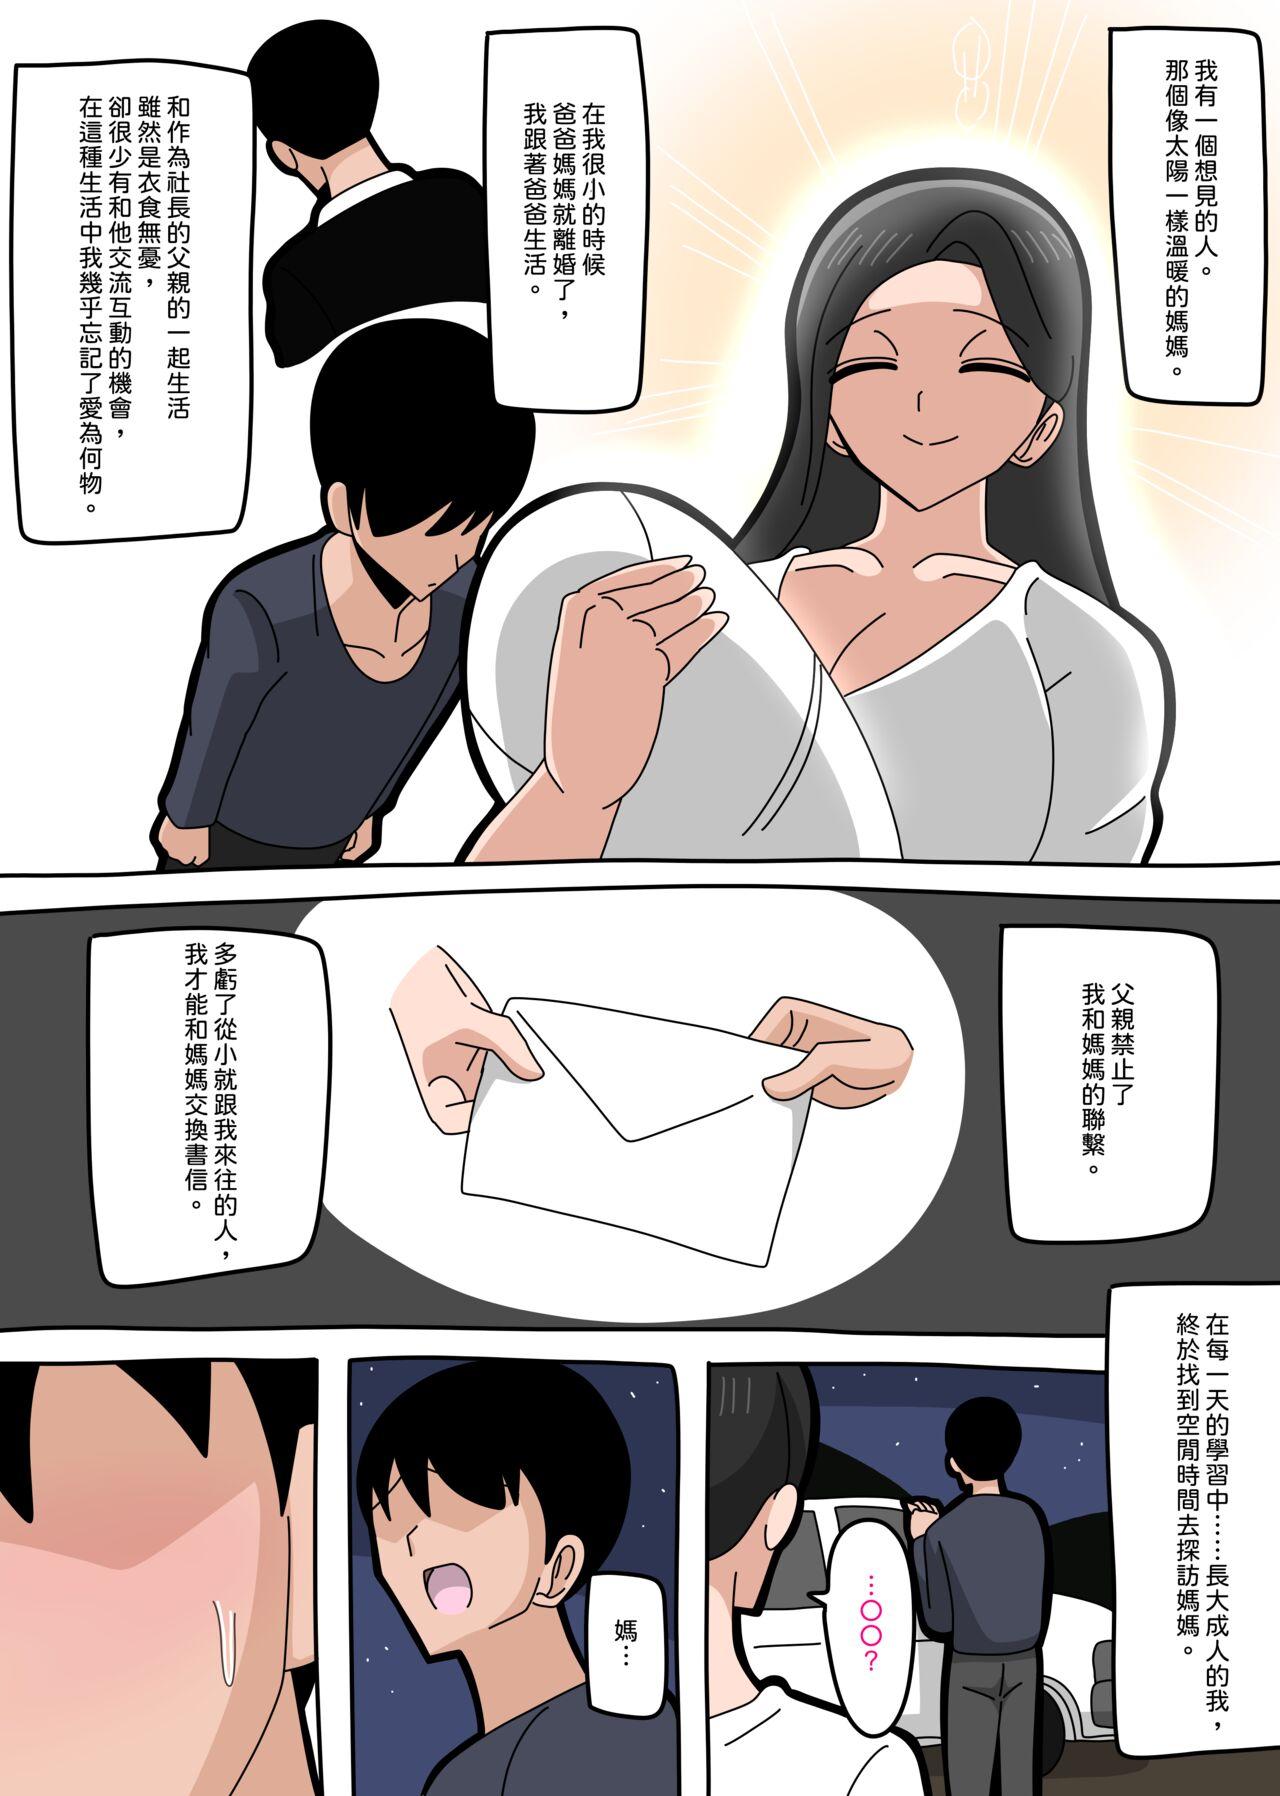 Chica [18master] 2023-5-24 Meeting mom again after a long separation | 與媽媽重逢… [Chinese][興趣使然的個人機翻] - Original Erotic - Picture 1